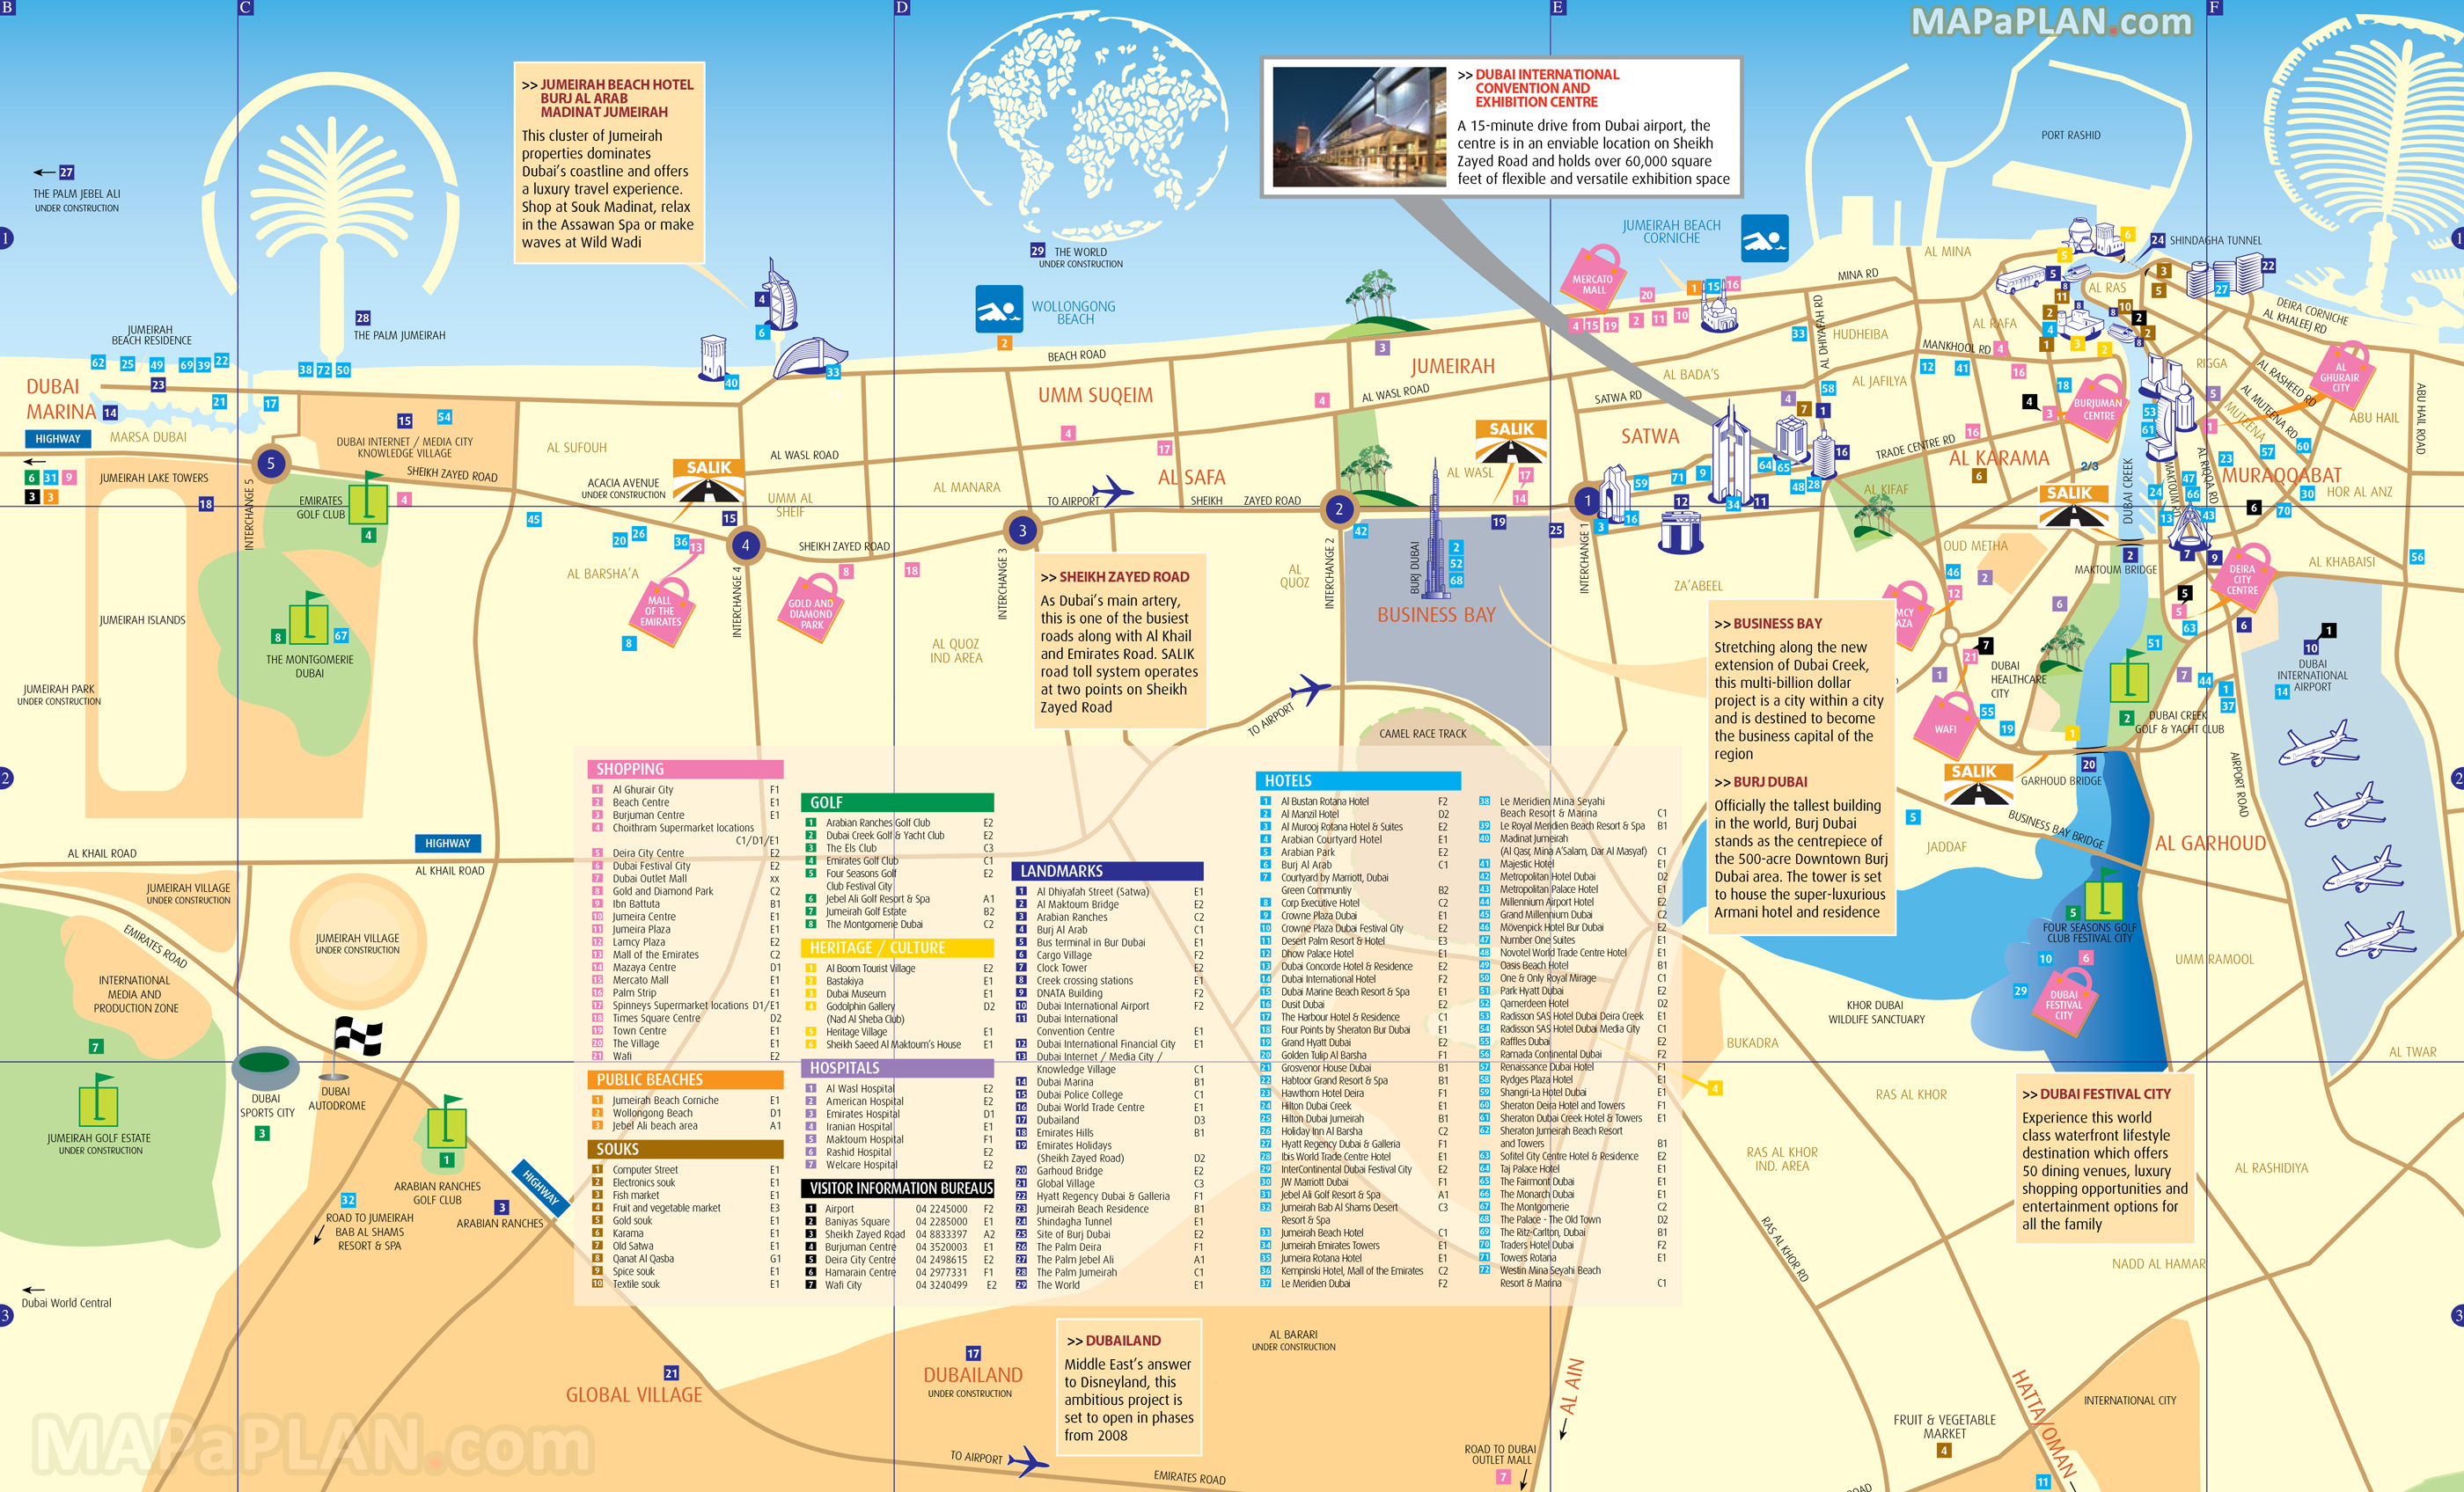 City centre detailed street travel guide must see places best hotels popular shopping malls Dubai top tourist attractions map